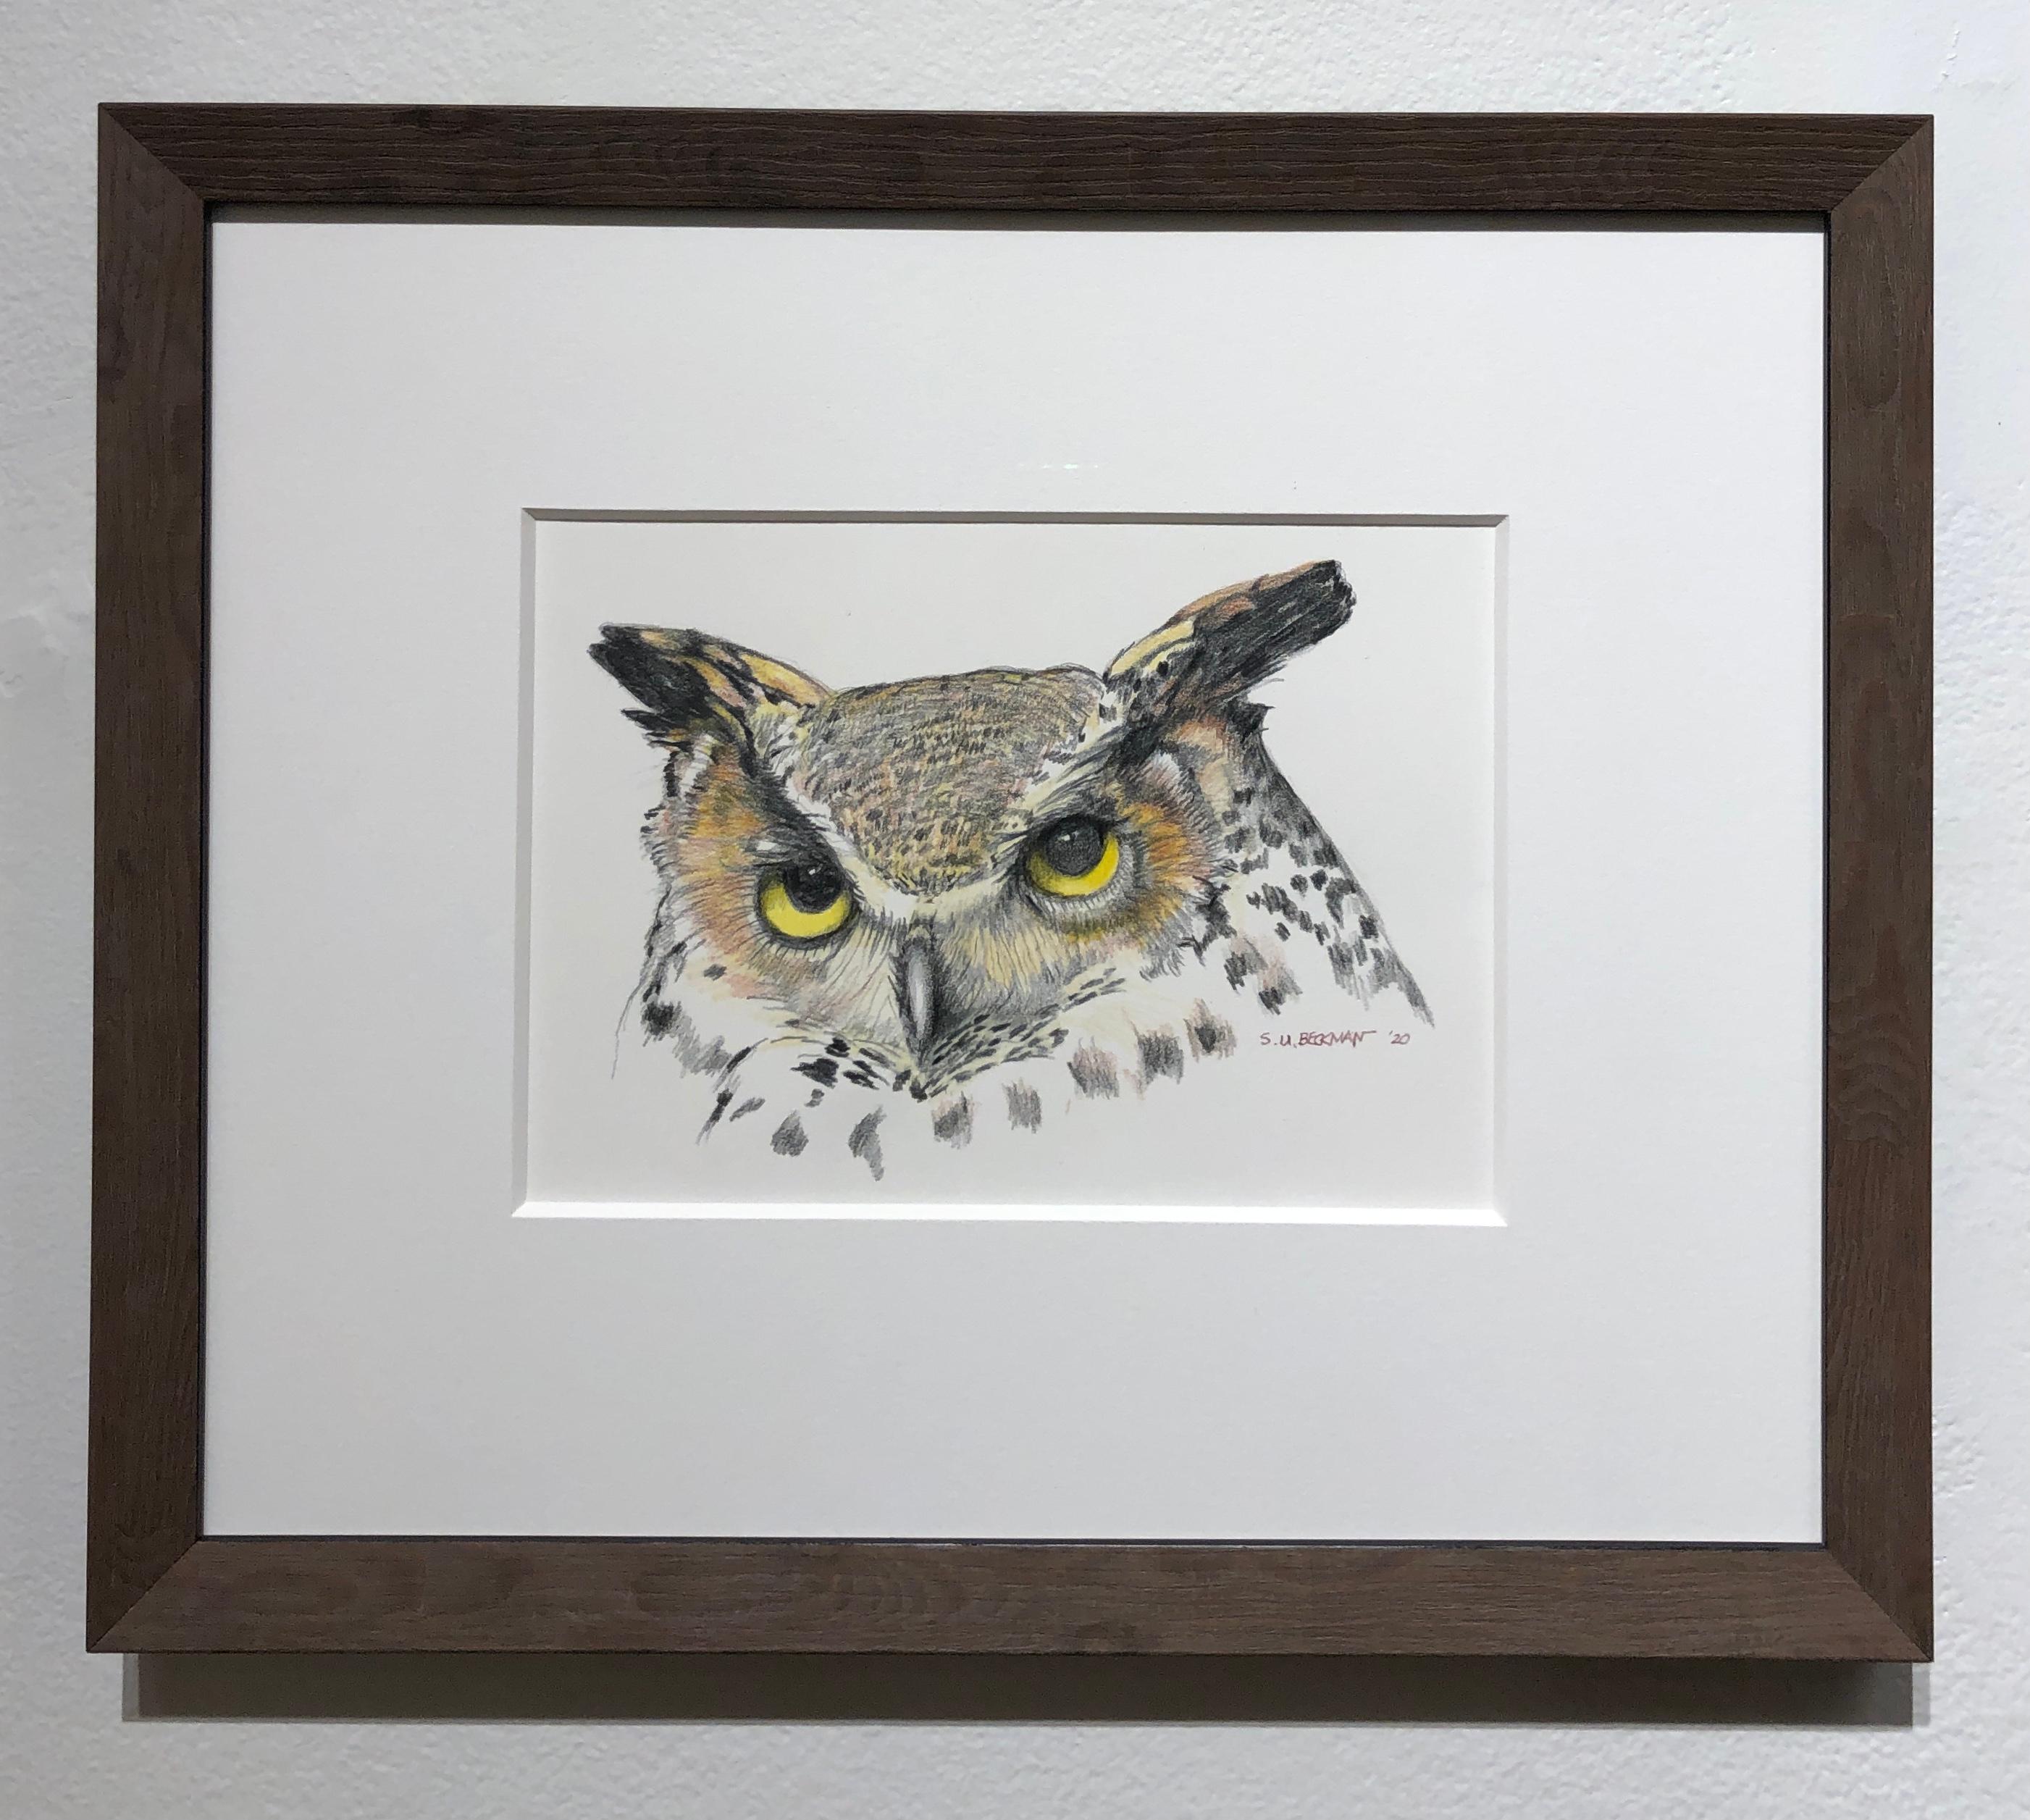 Owl - Colored Pencil Drawing of a Great Horned Owl - Art by Sylvia Beckman